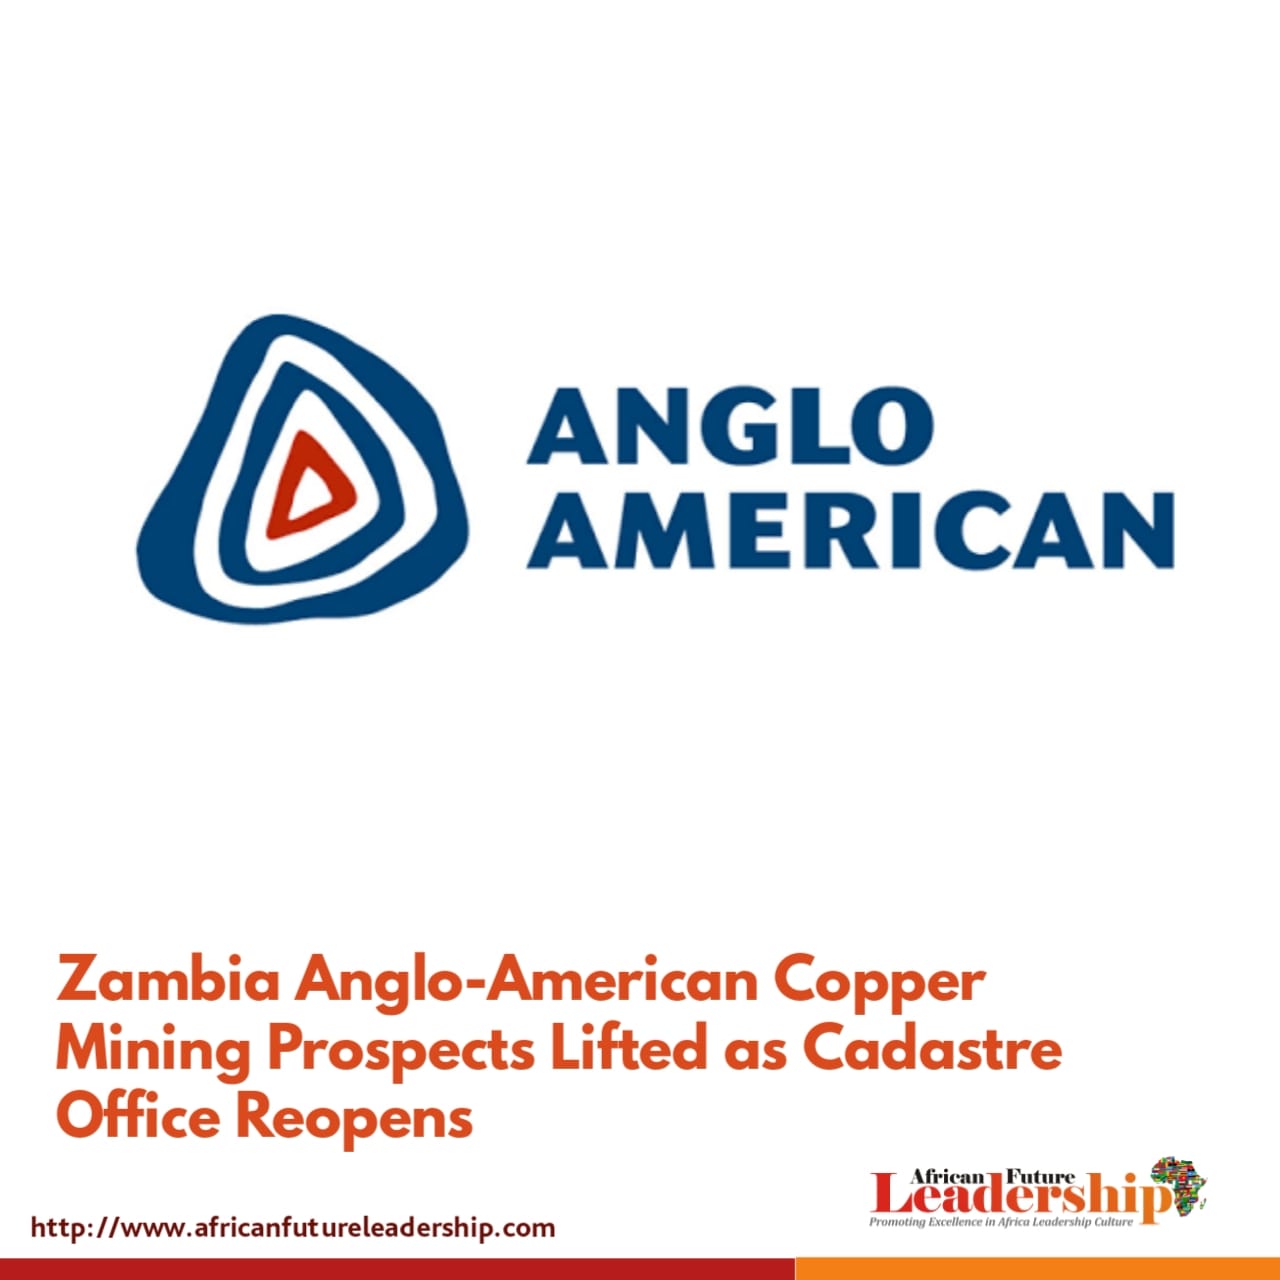 Zambia Anglo-American Copper Mining Prospects Lifted as Cadastre Office Reopens